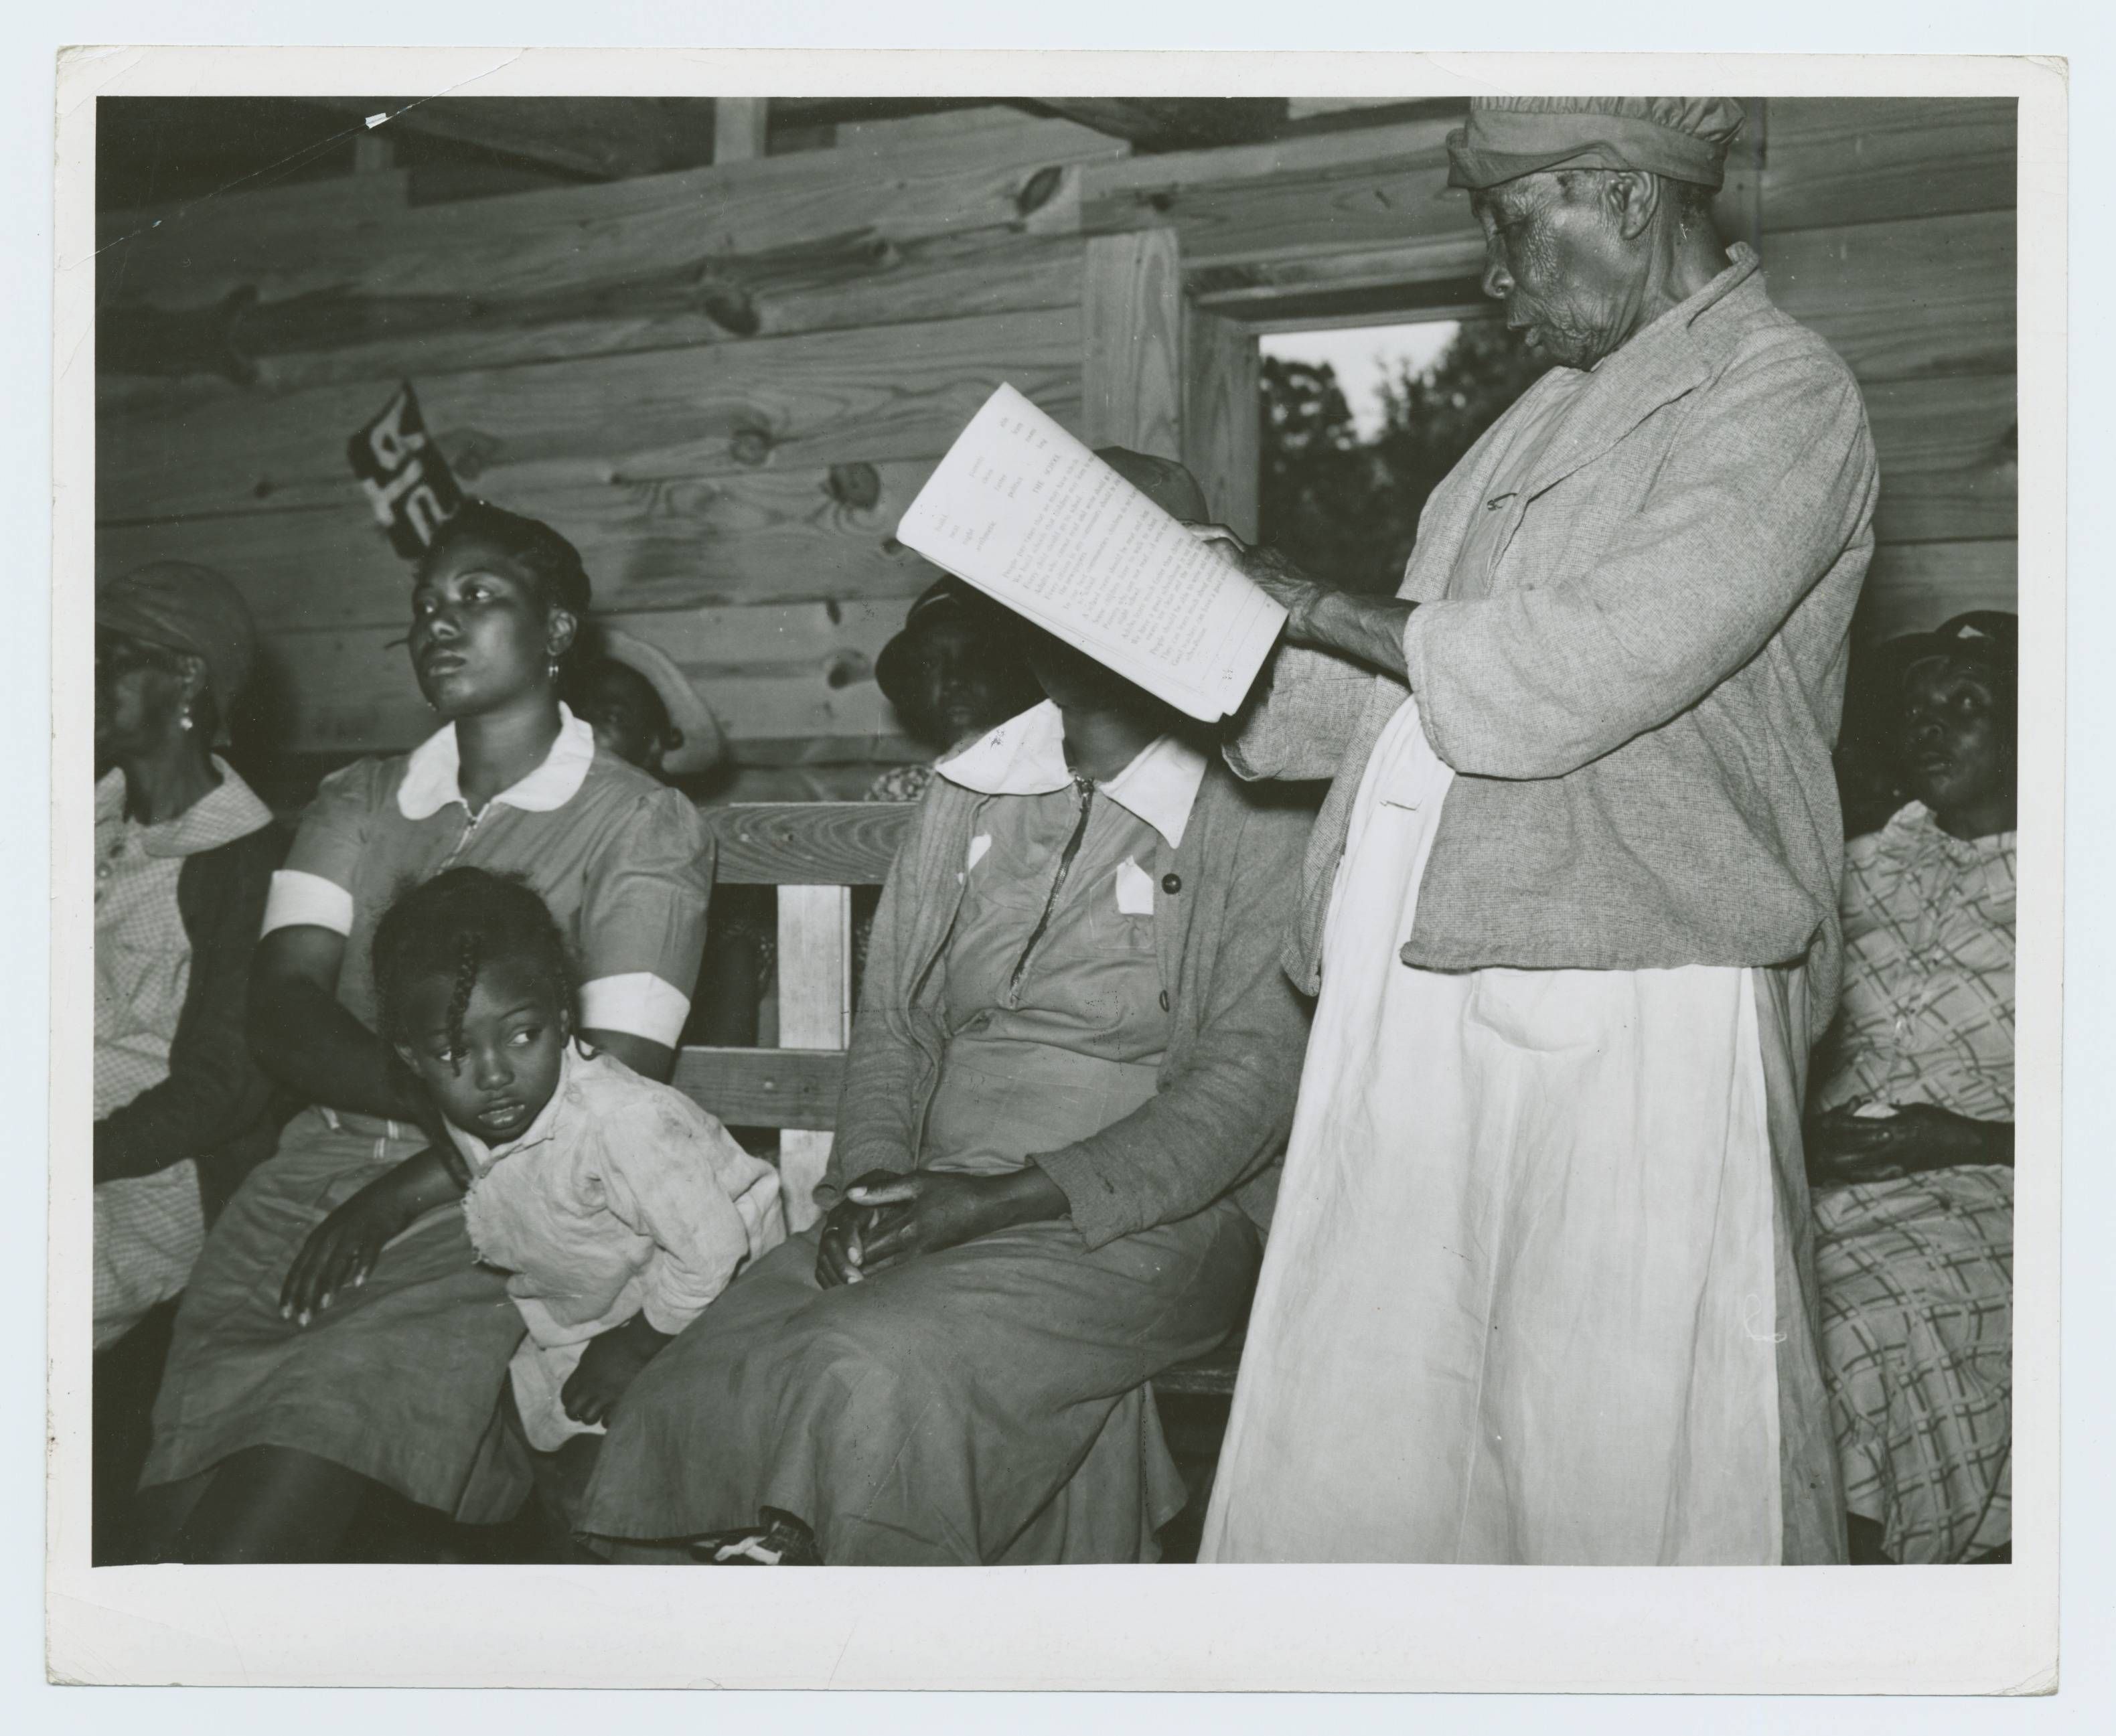 Star pupil, 82 years old, reading her lesson in adult class, Gee's Bend, Alabama, May 1939 - Marion Post Wolcott